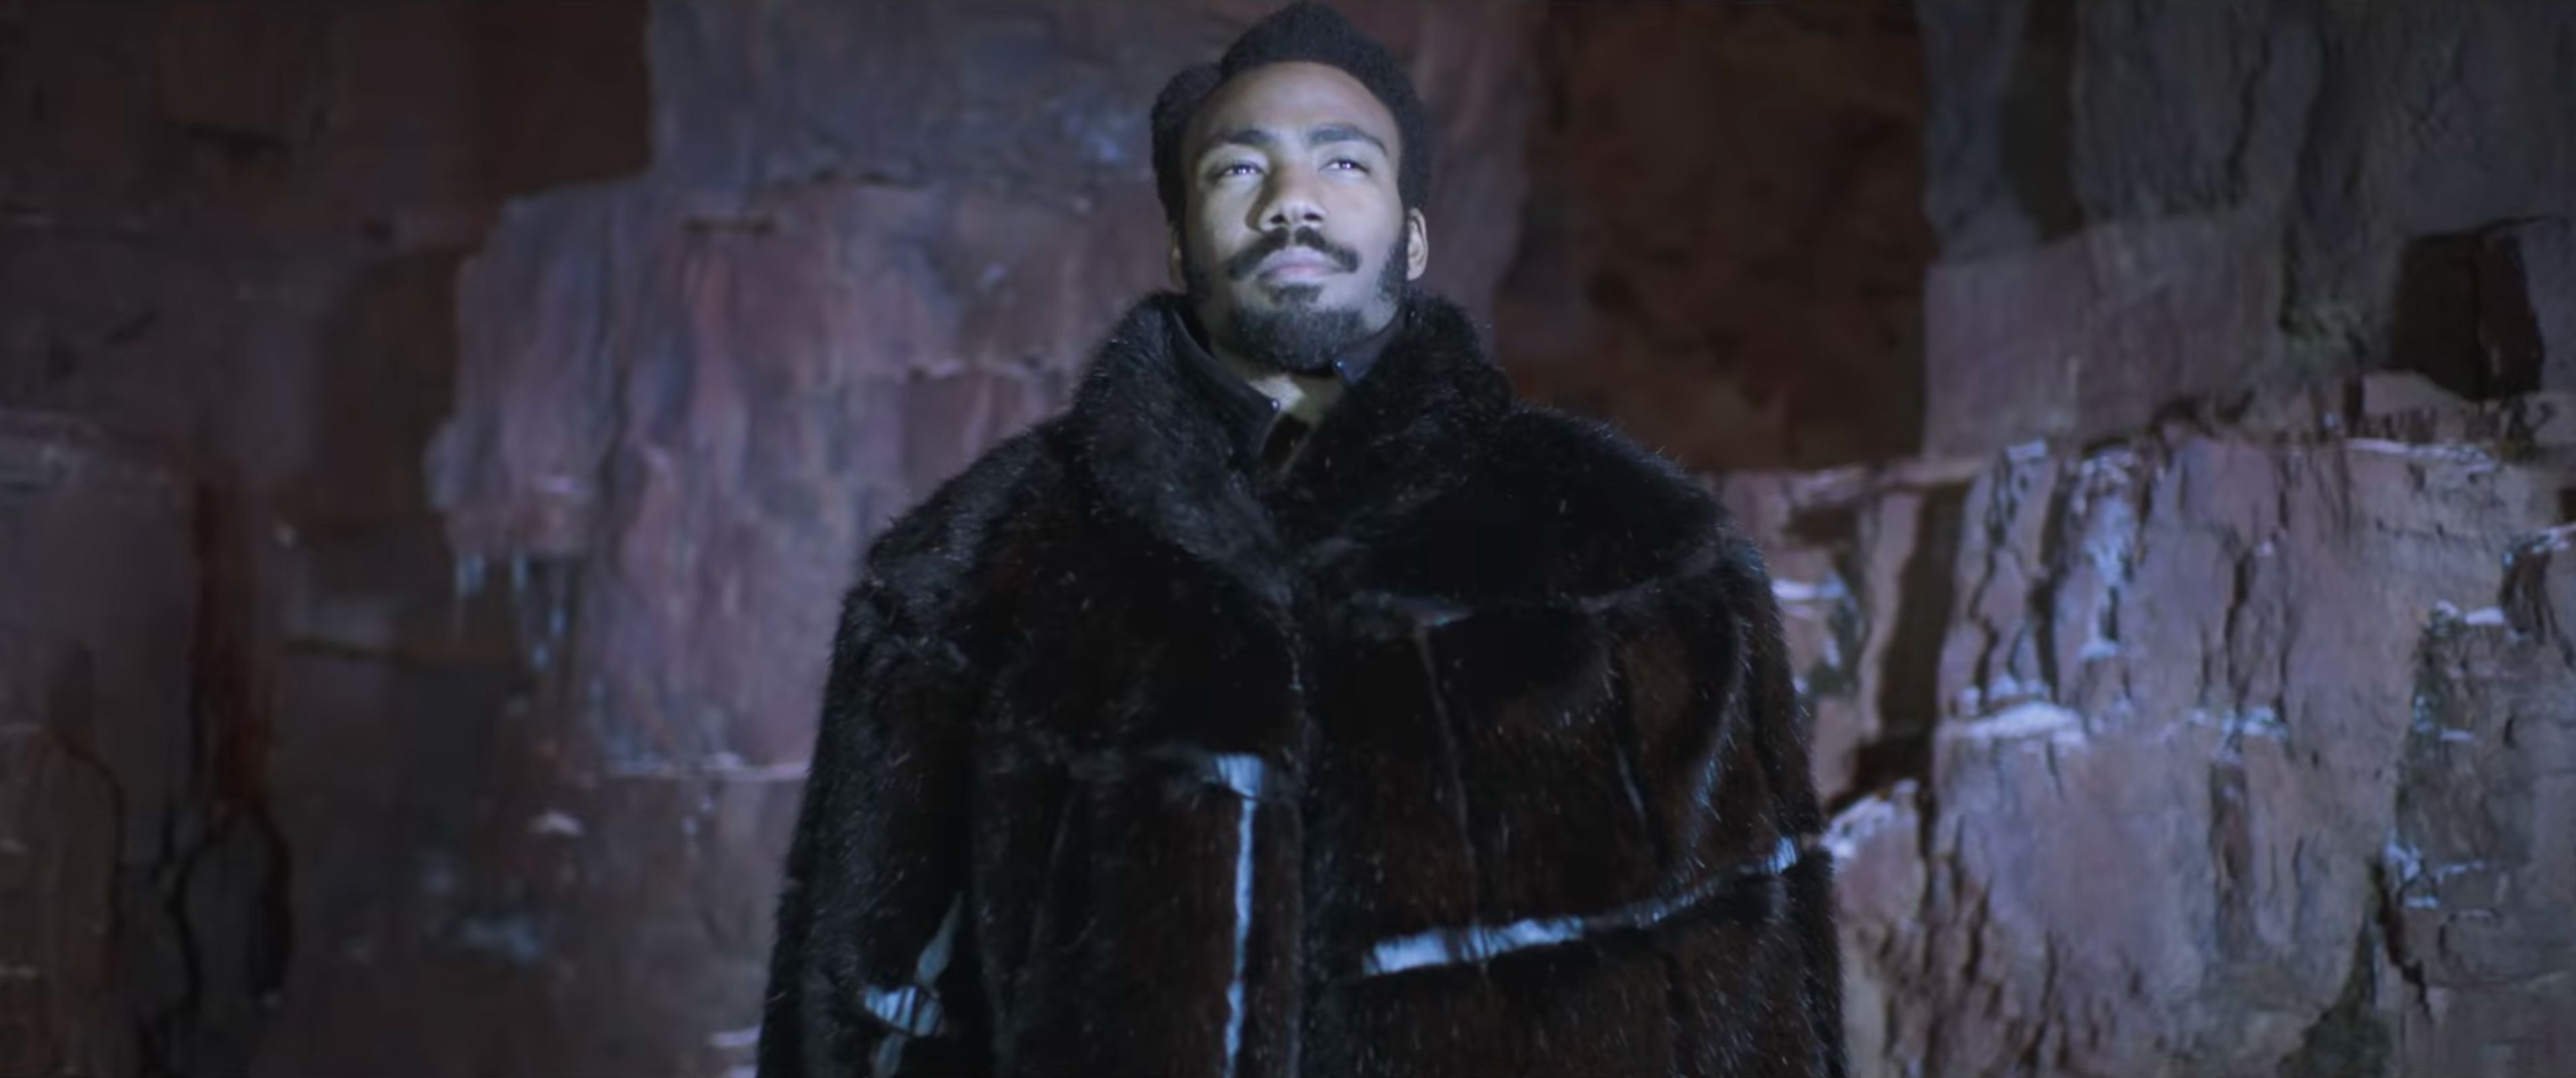 Solo: A Star Wars Story photo 3